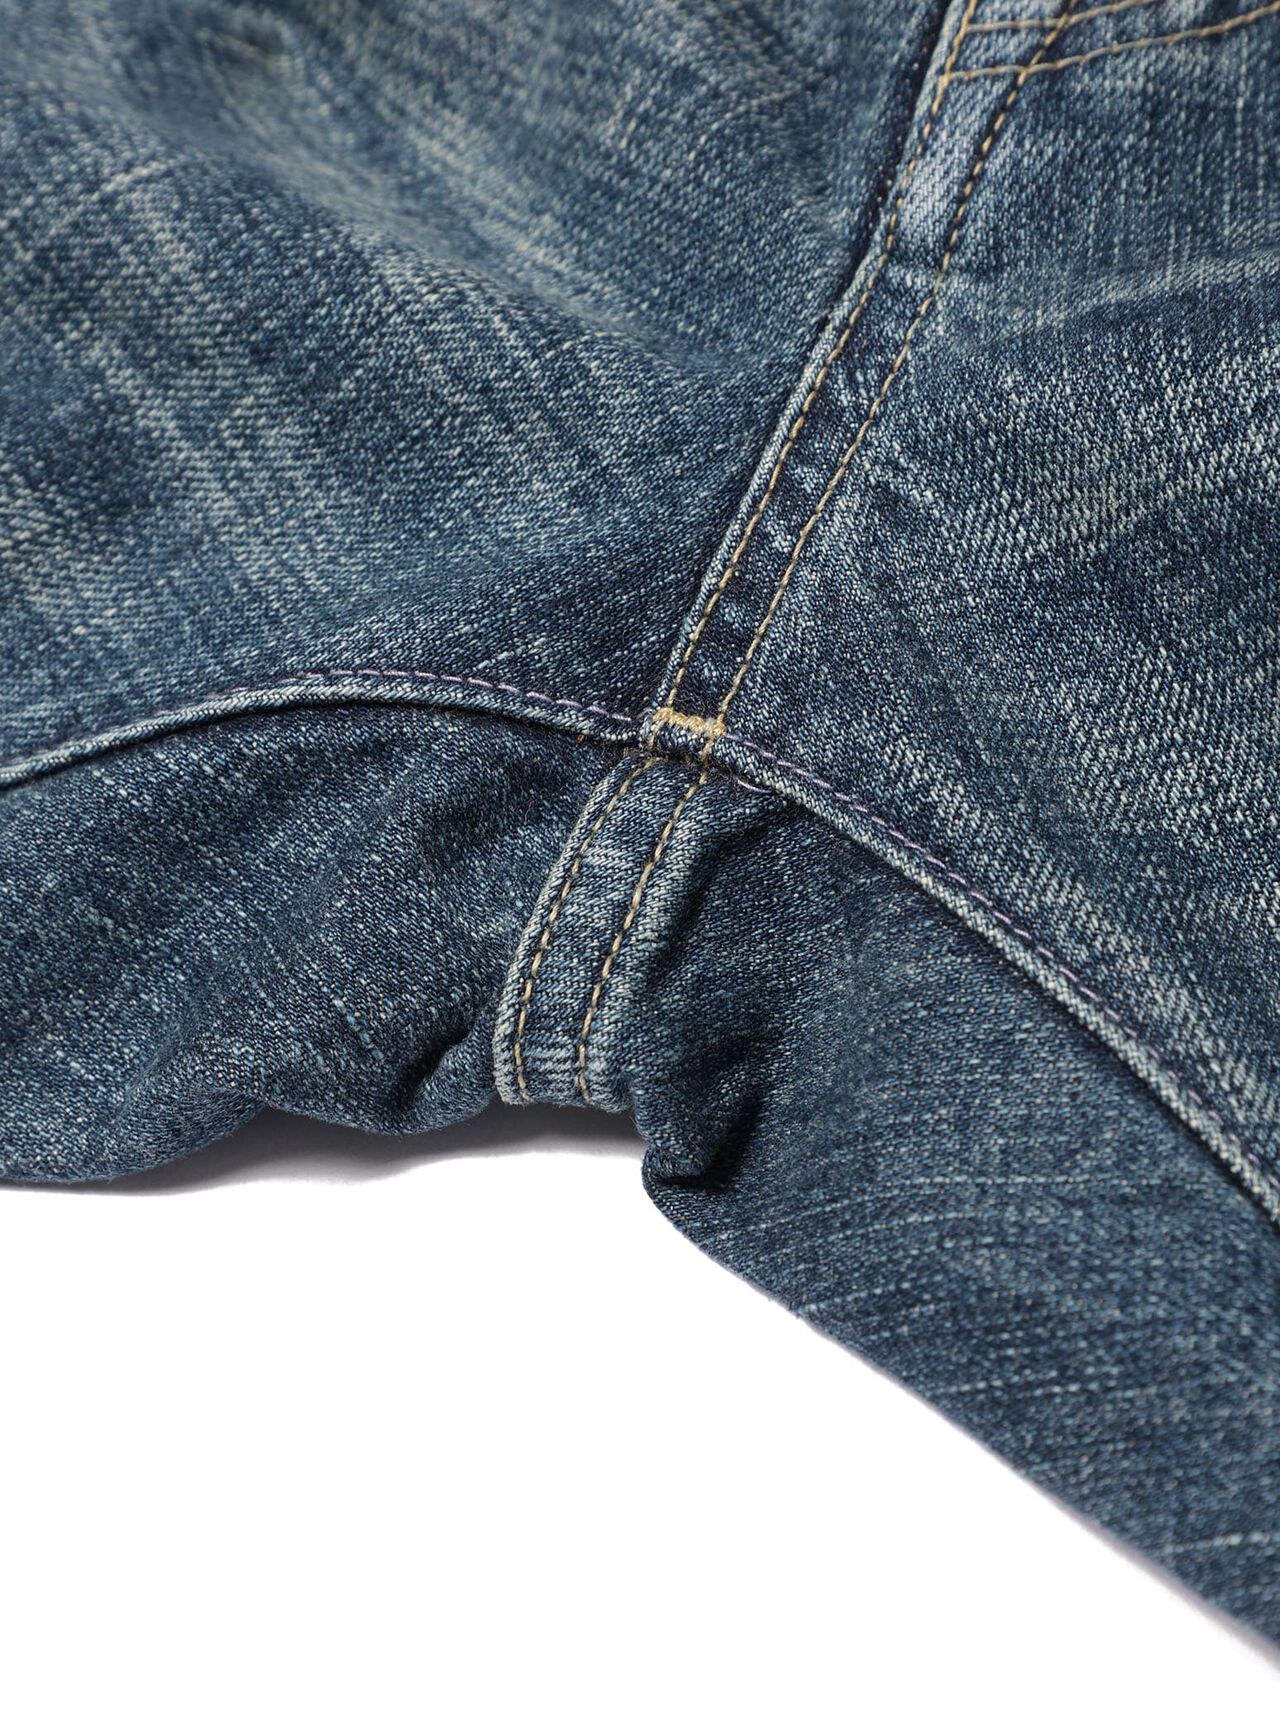 Jeans - butt 22-U2 5 years,M, large image number 5